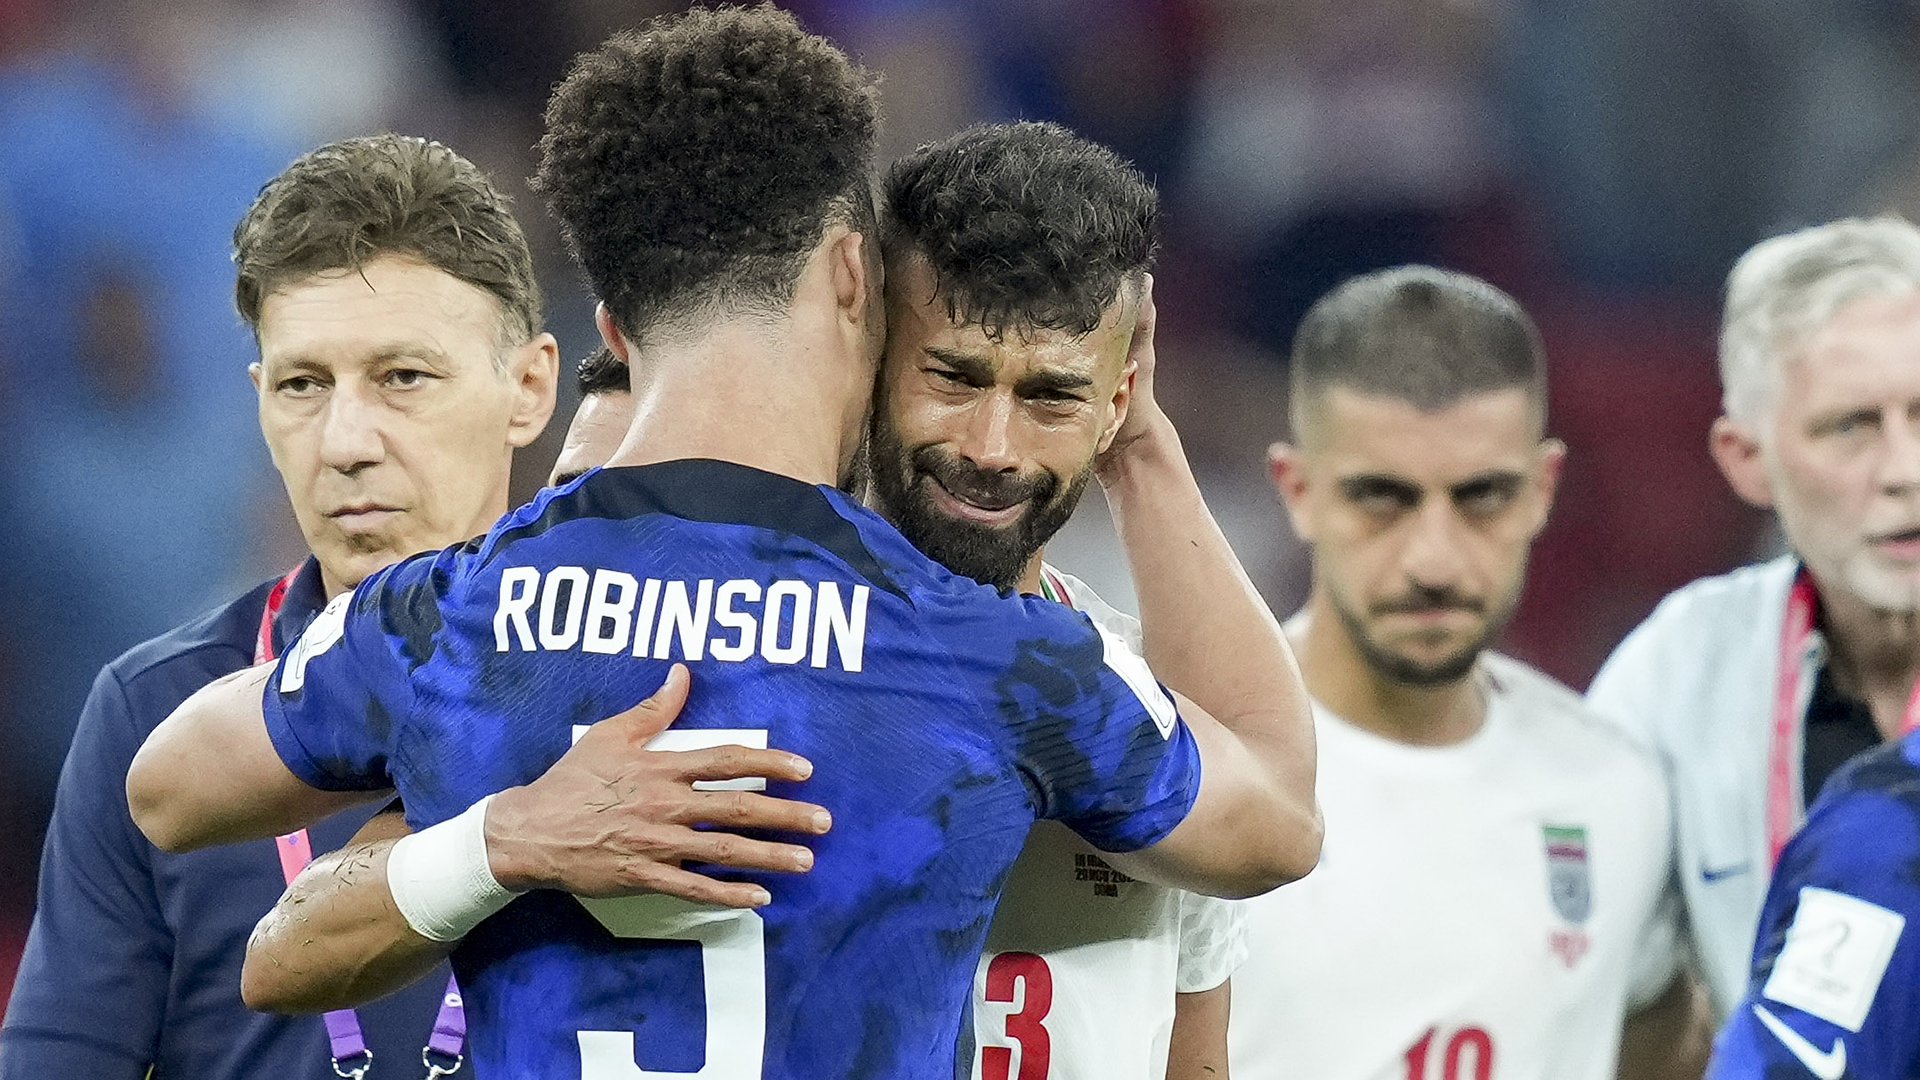 'After the game he messaged me' - USMNT's Robinson reveals new details of World Cup interaction with heartbroken Iran defender Rezaeian